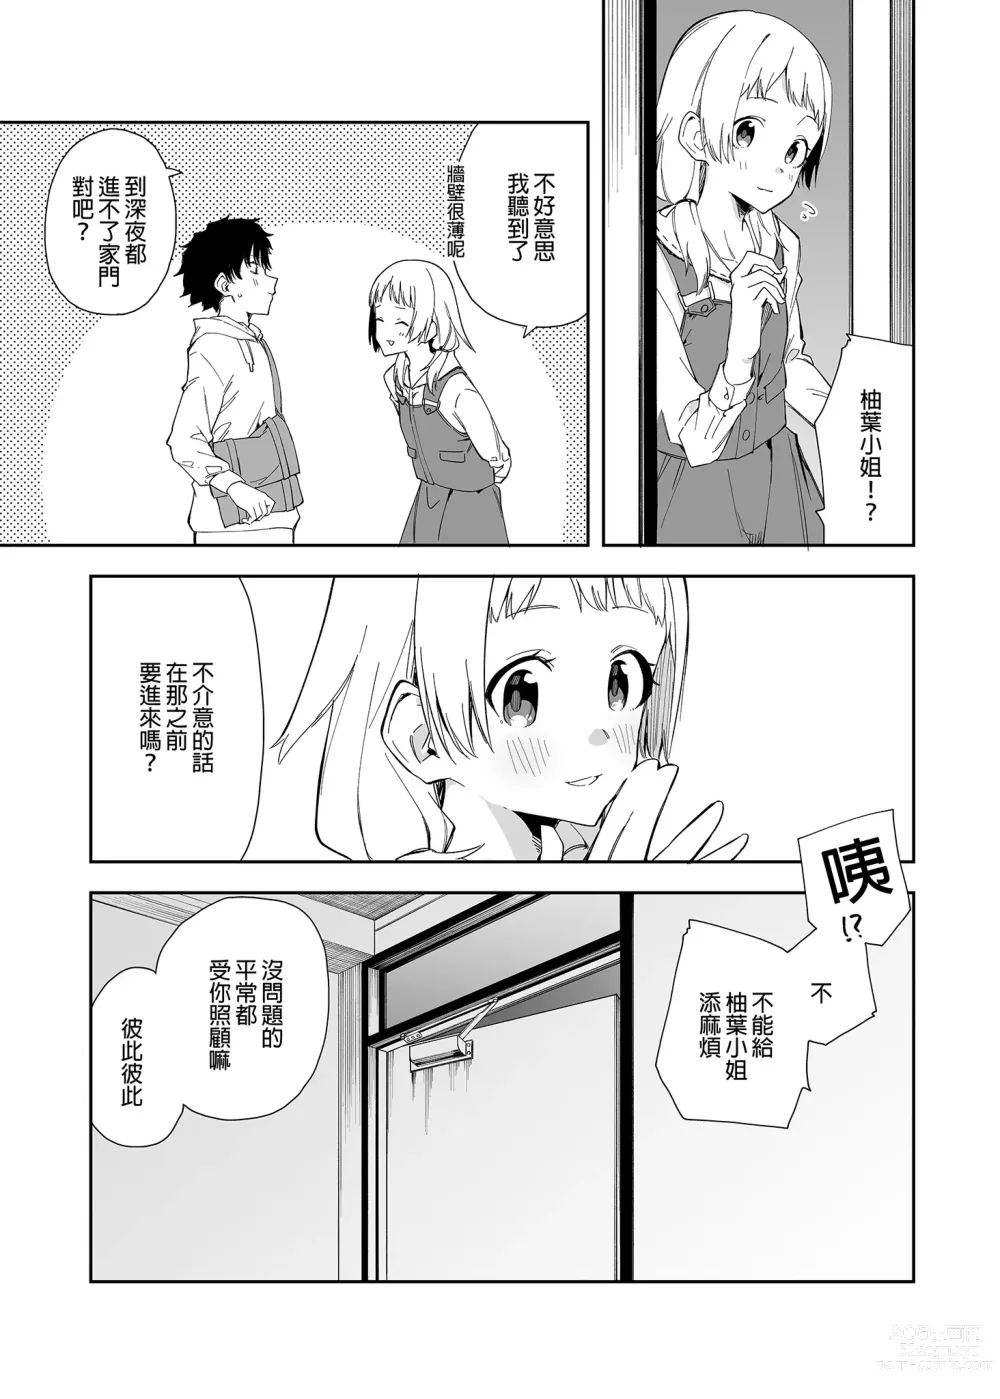 Page 7 of doujinshi 隣人は有名配信者